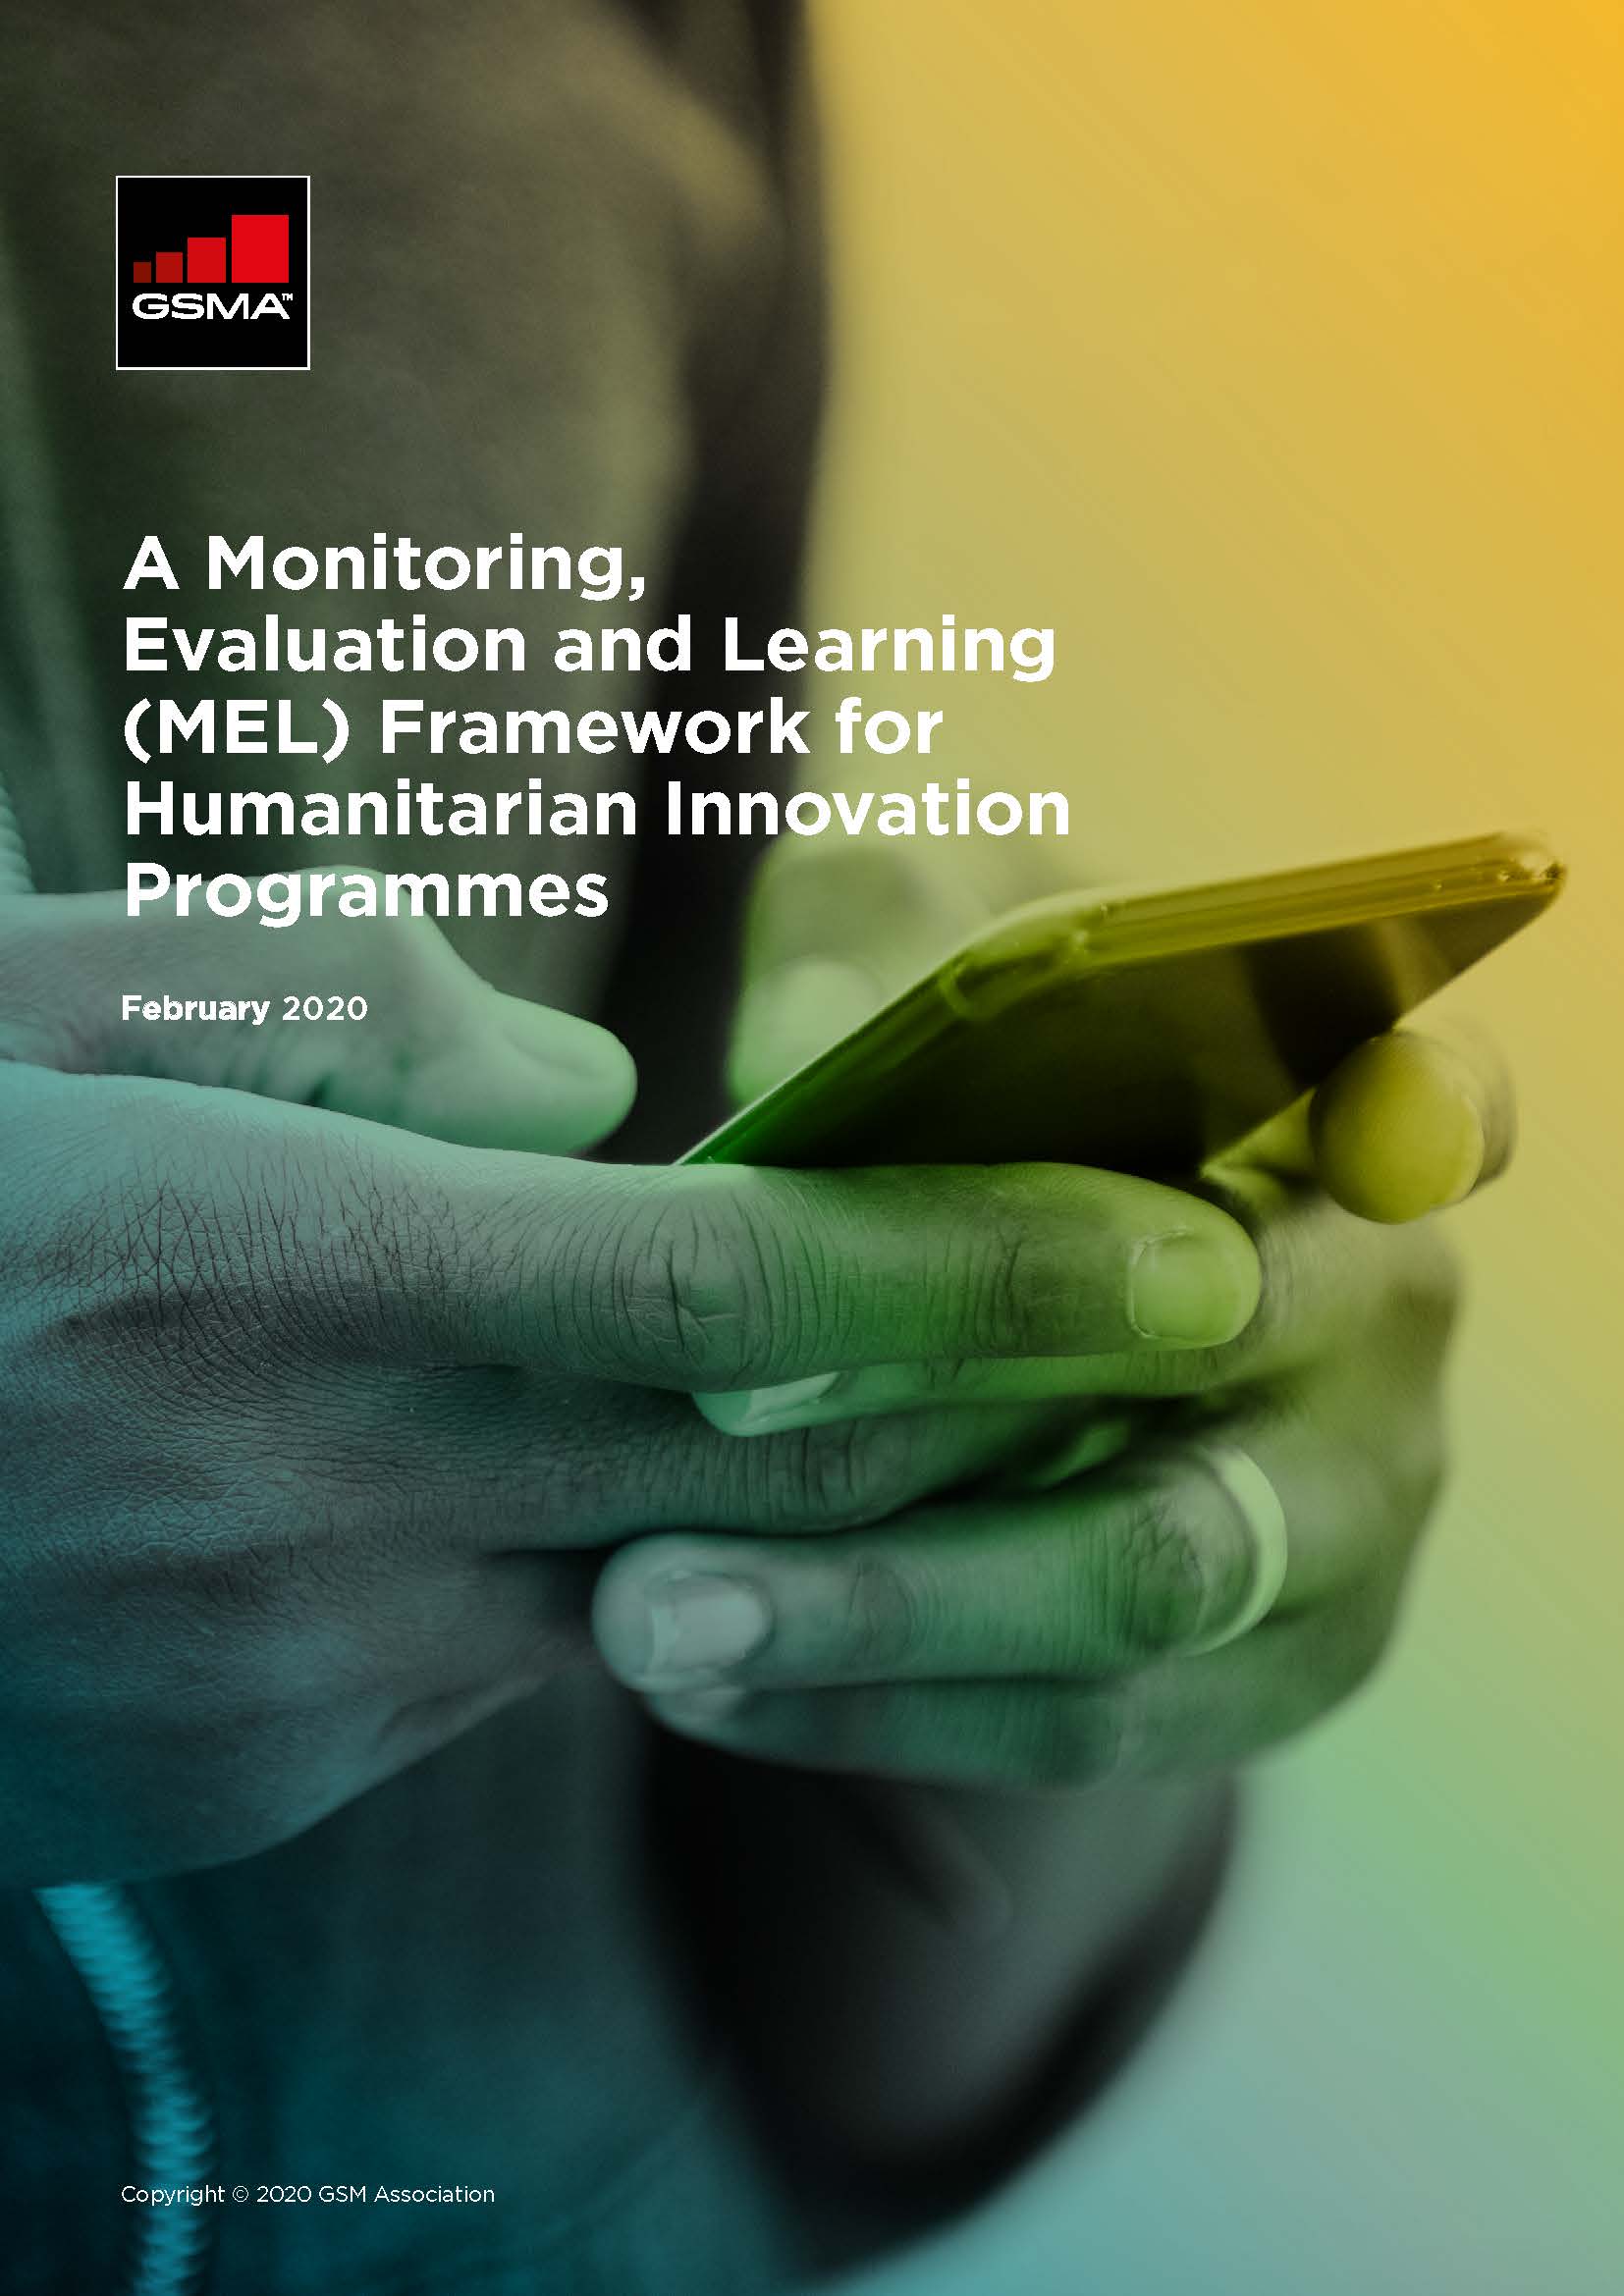 A Monitoring Evaluation and Learning (MEL) Framework for Humanitarian Innovation Programmes image